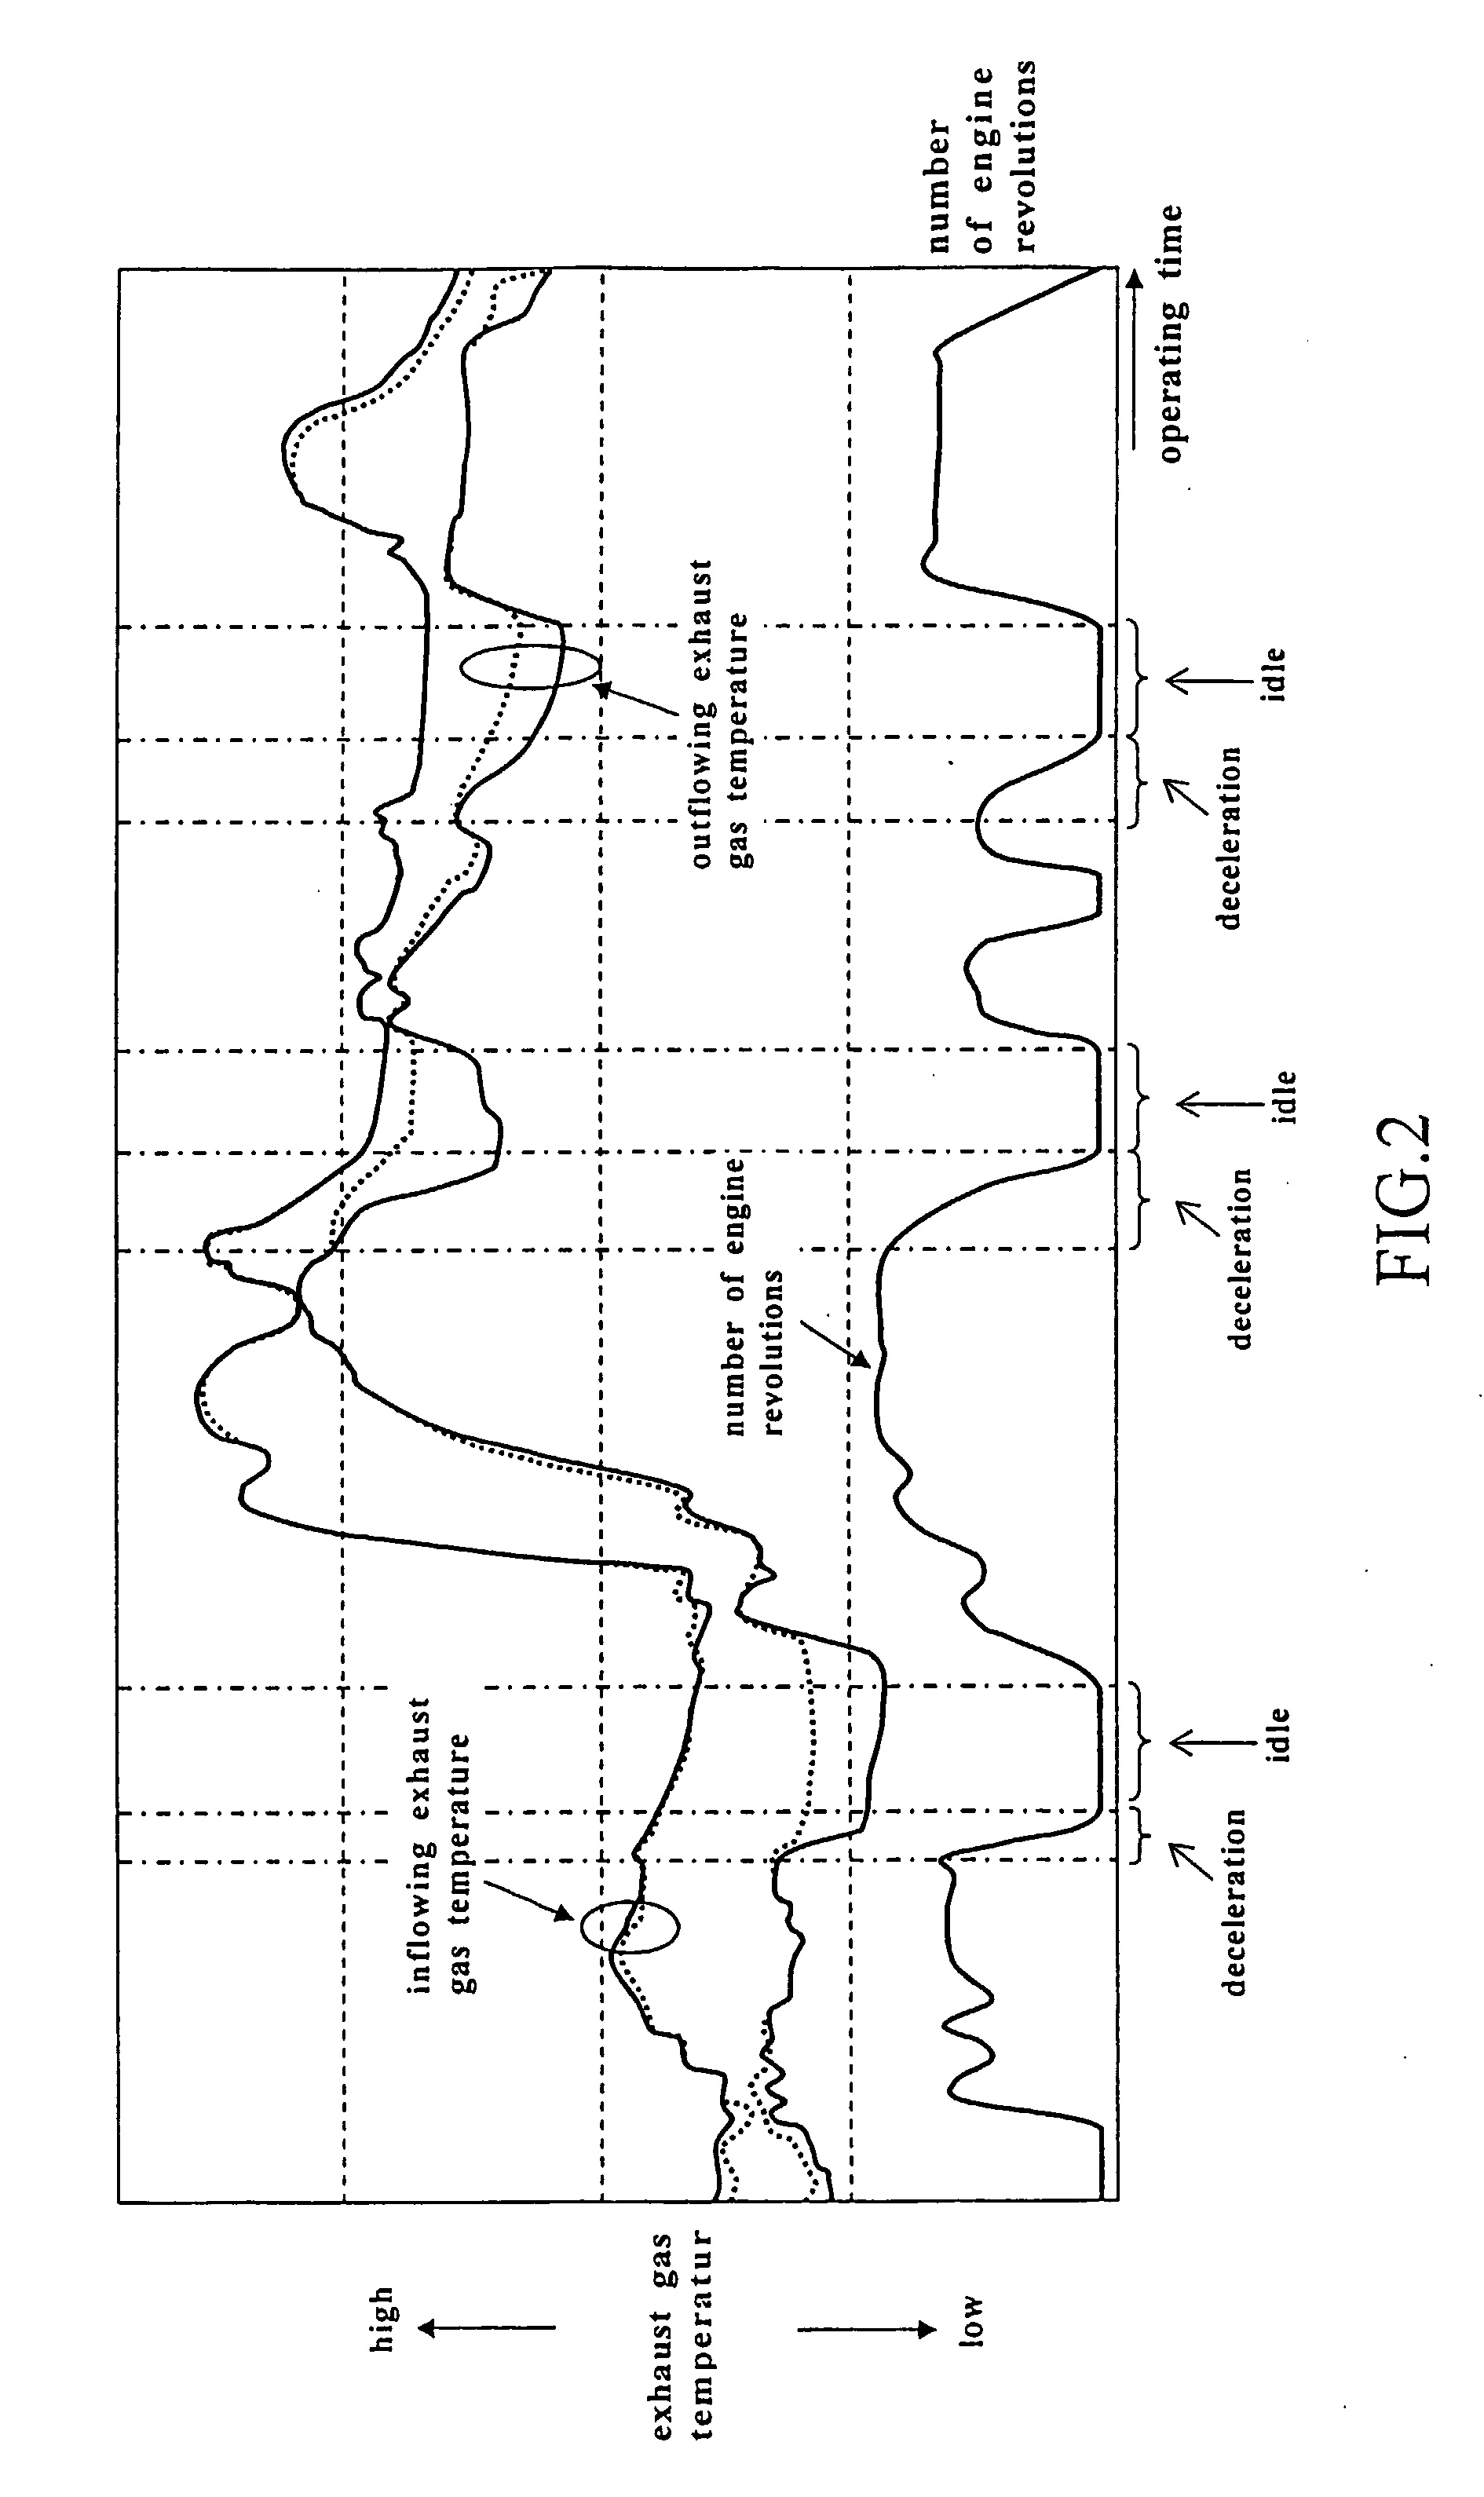 Method of Determining Abnormality in Particulate Filter